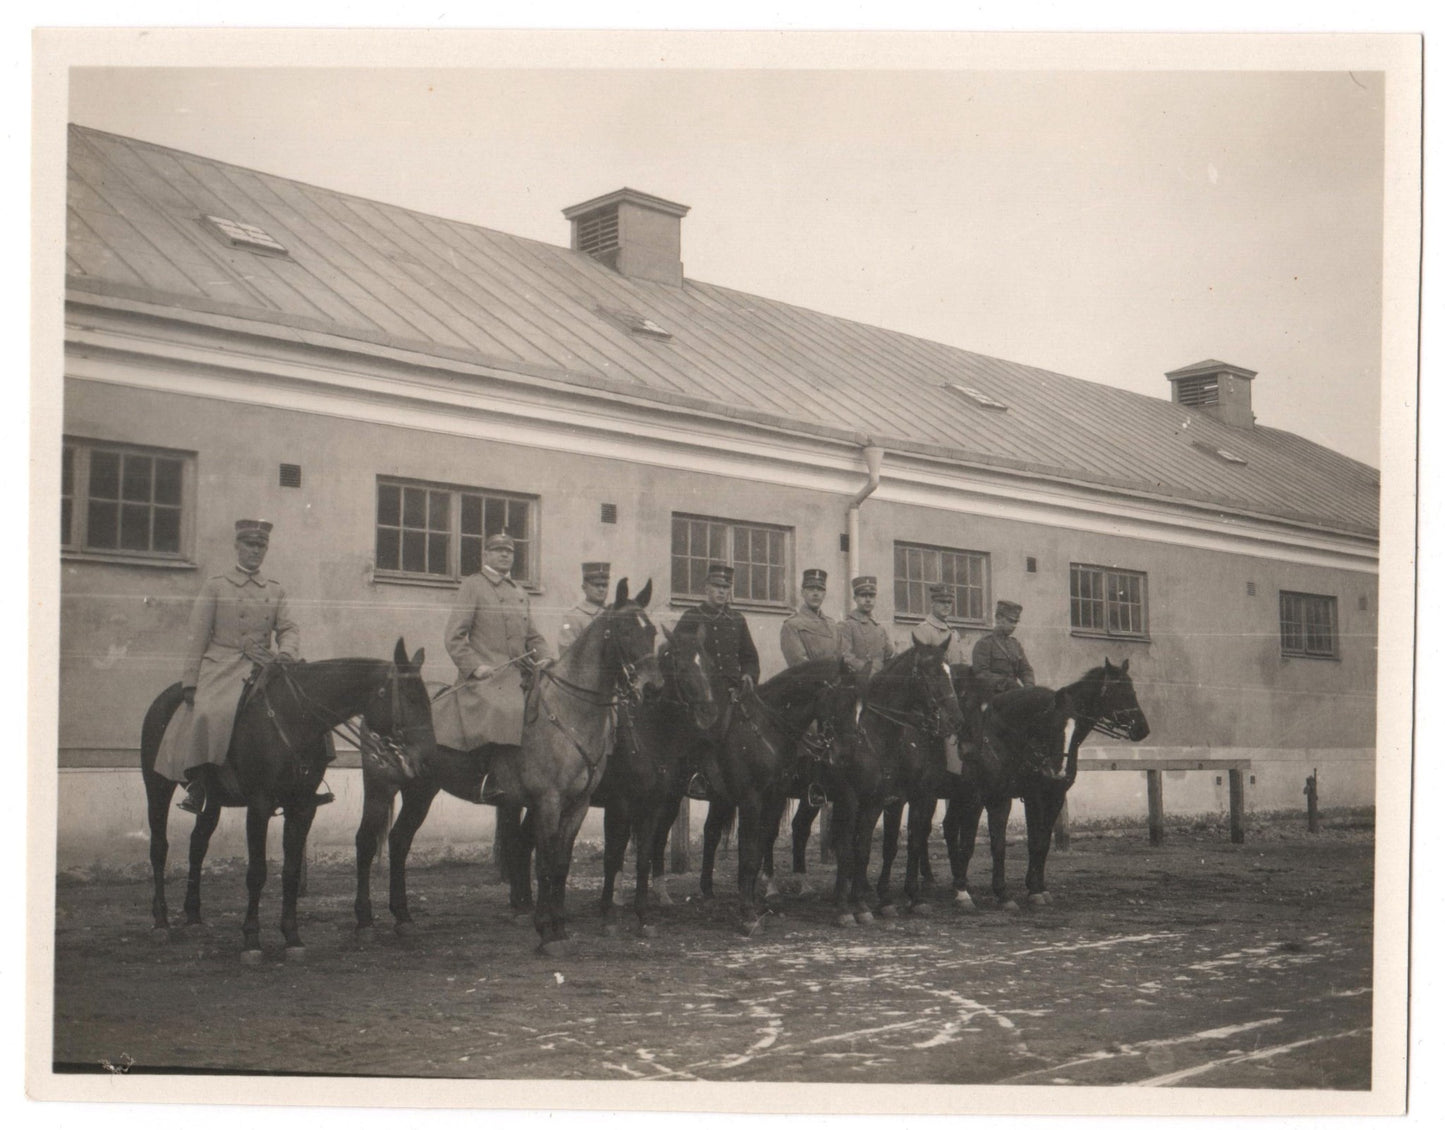 Vintage Military Photography - Swedish Soliders - Officers on Horses - Sweden